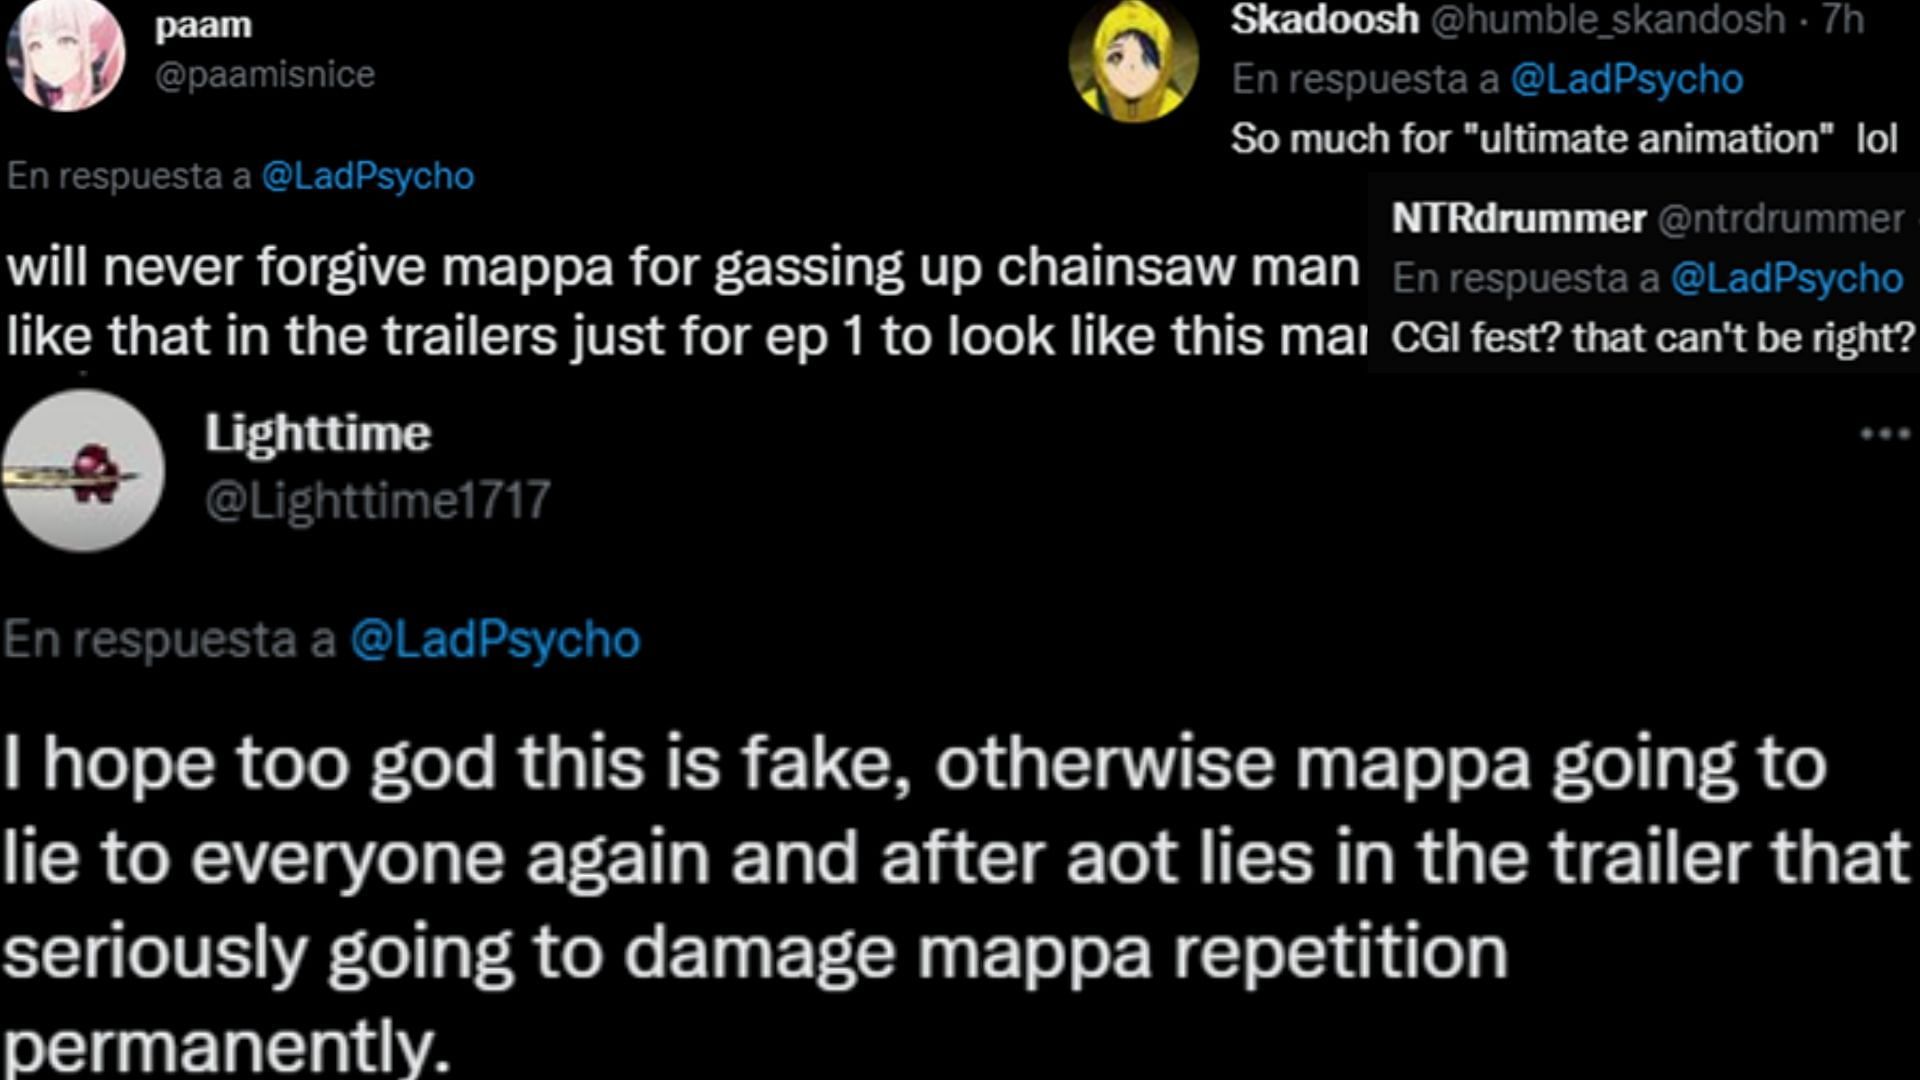 MAPPA's use of CGI in Chainsaw Man anime causes controversy